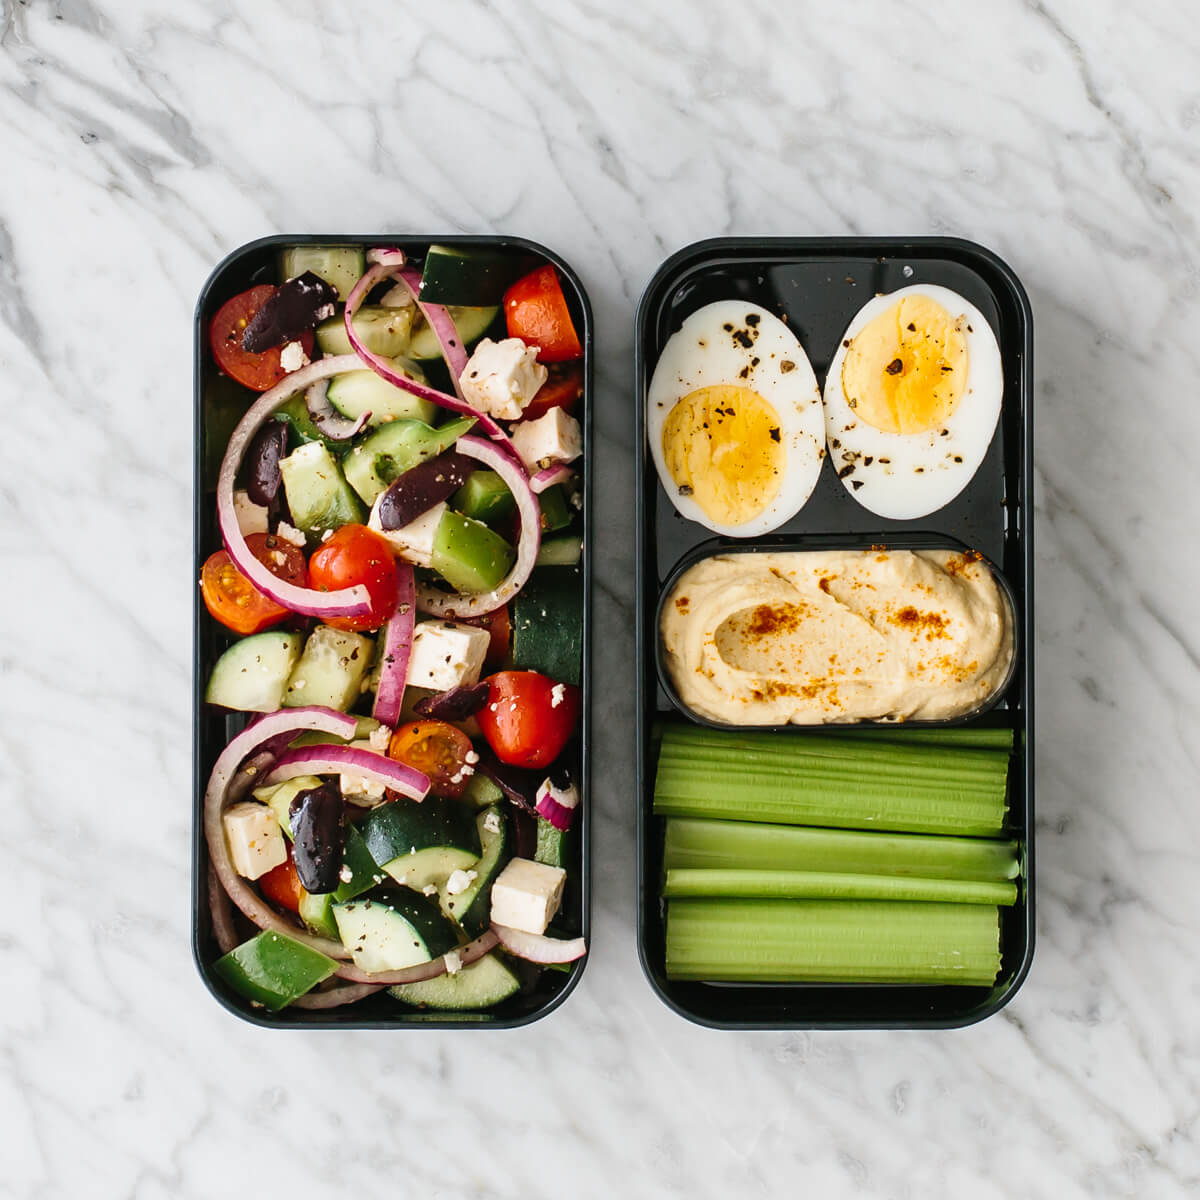 Bento box filled with Greek salad, hard boiled egg, celery and hummus.